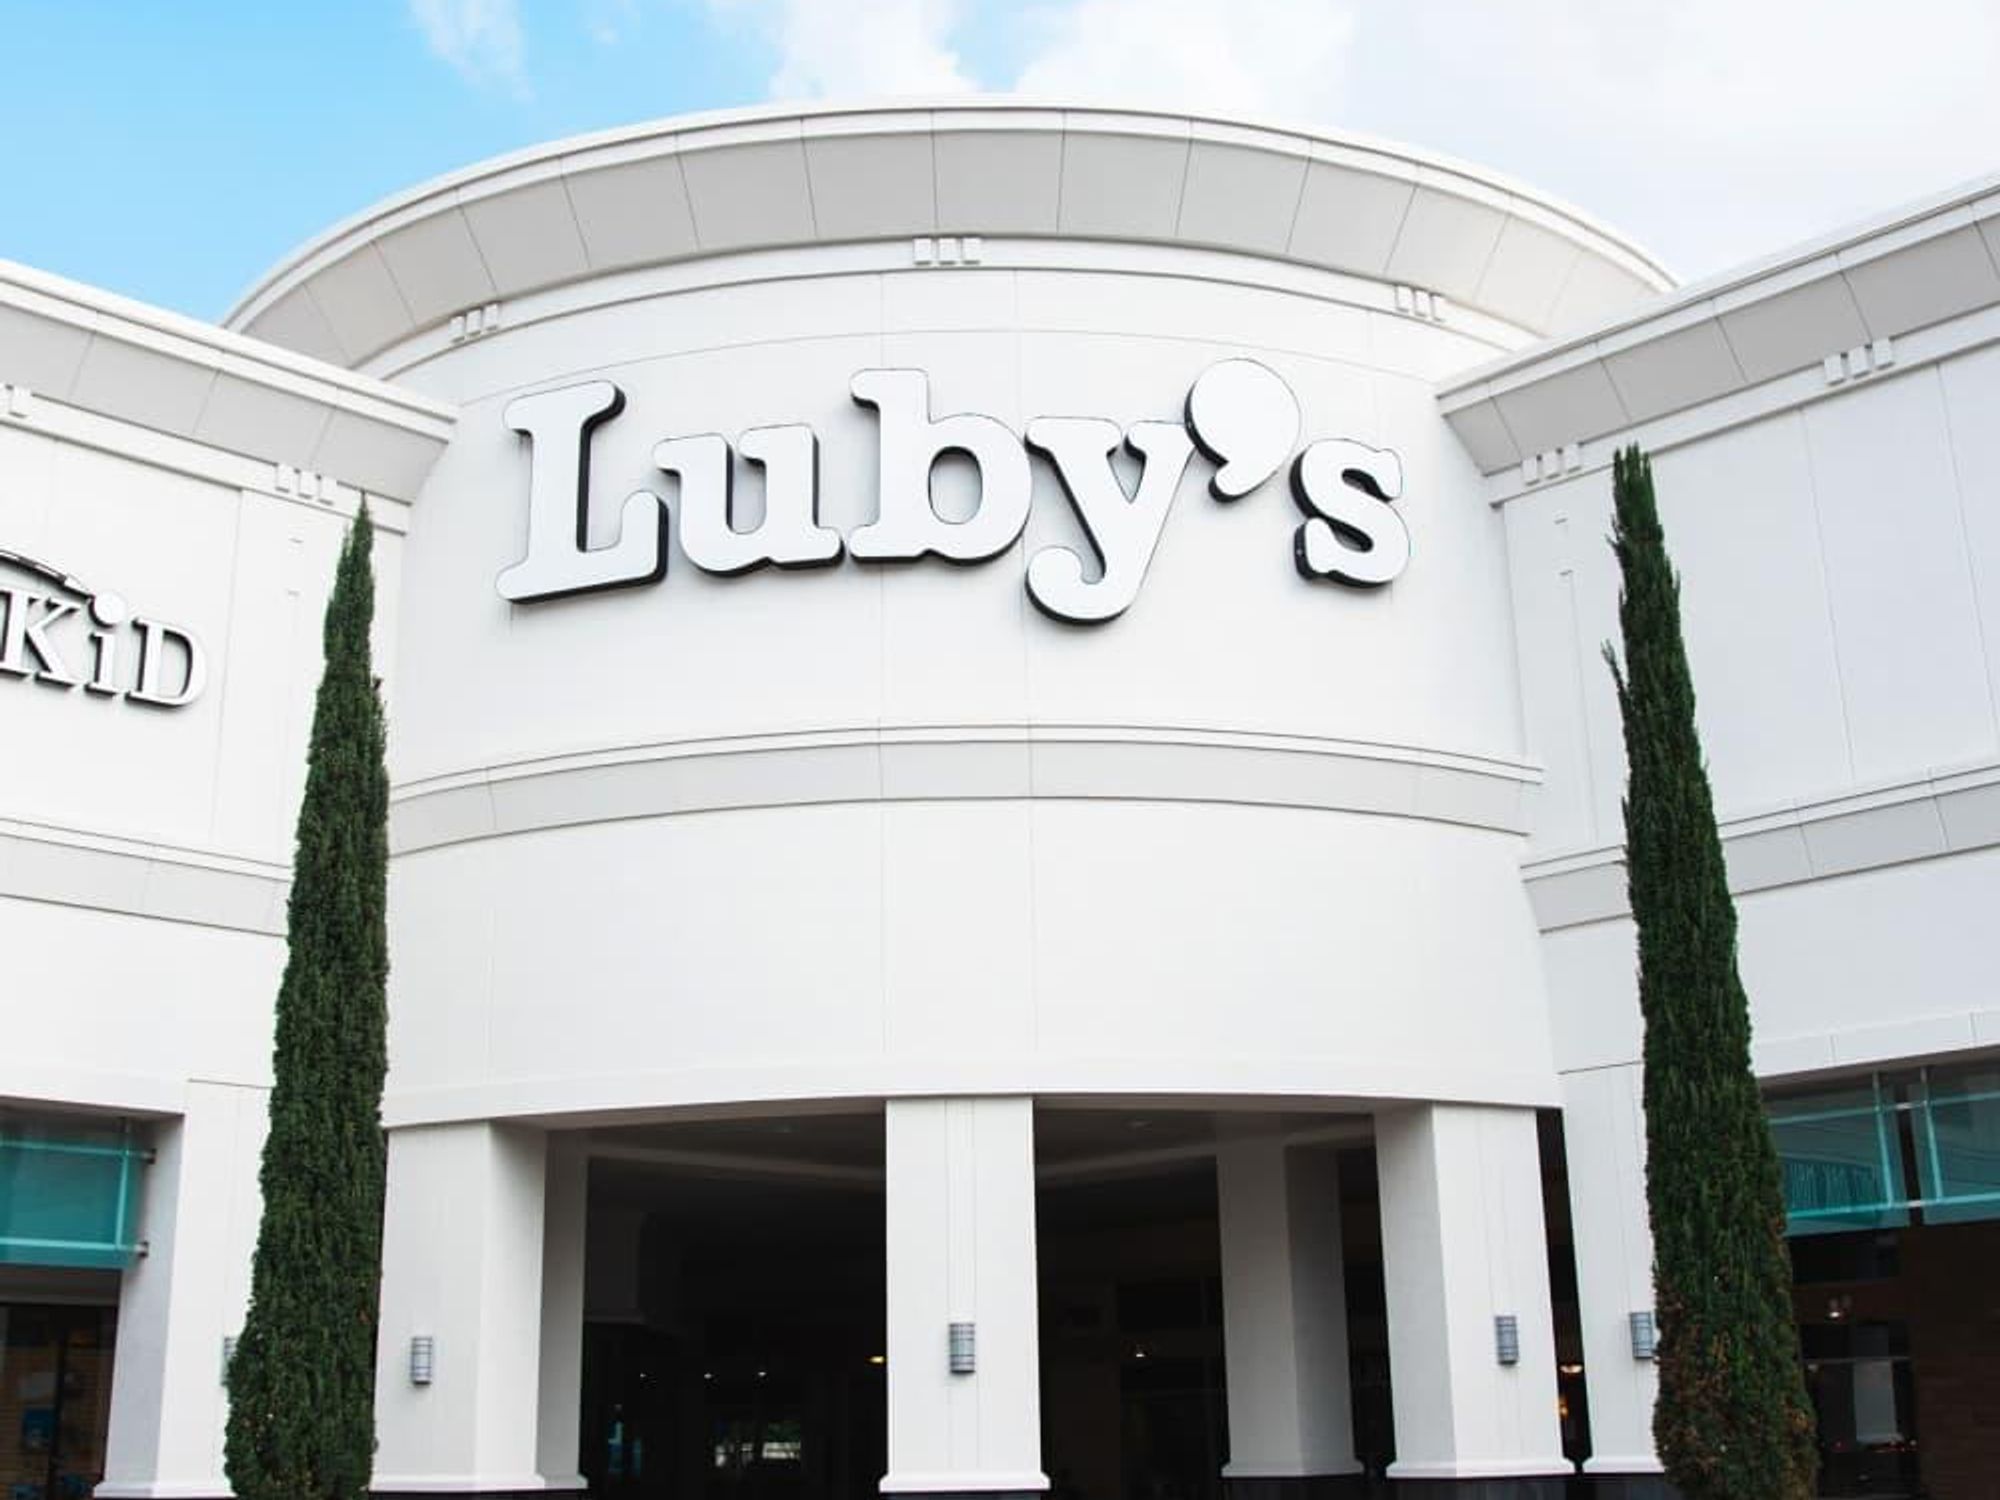 Luby's exterior